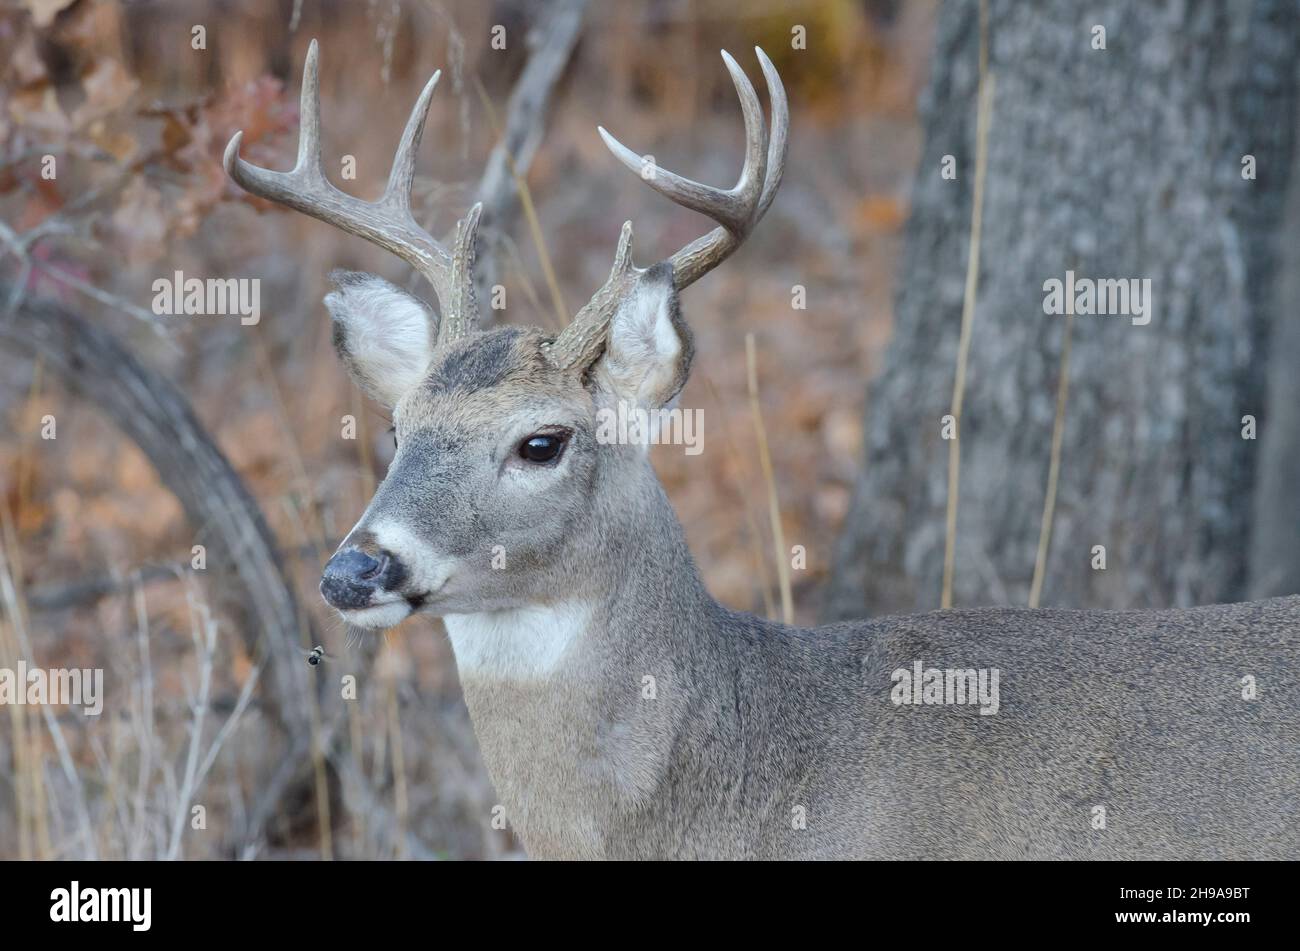 https://c8.alamy.com/comp/2H9A9BT/white-tailed-deer-odocoileus-virginianus-buck-in-woods-and-being-harassed-by-deer-bot-fly-cephenemyia-sp-2H9A9BT.jpg